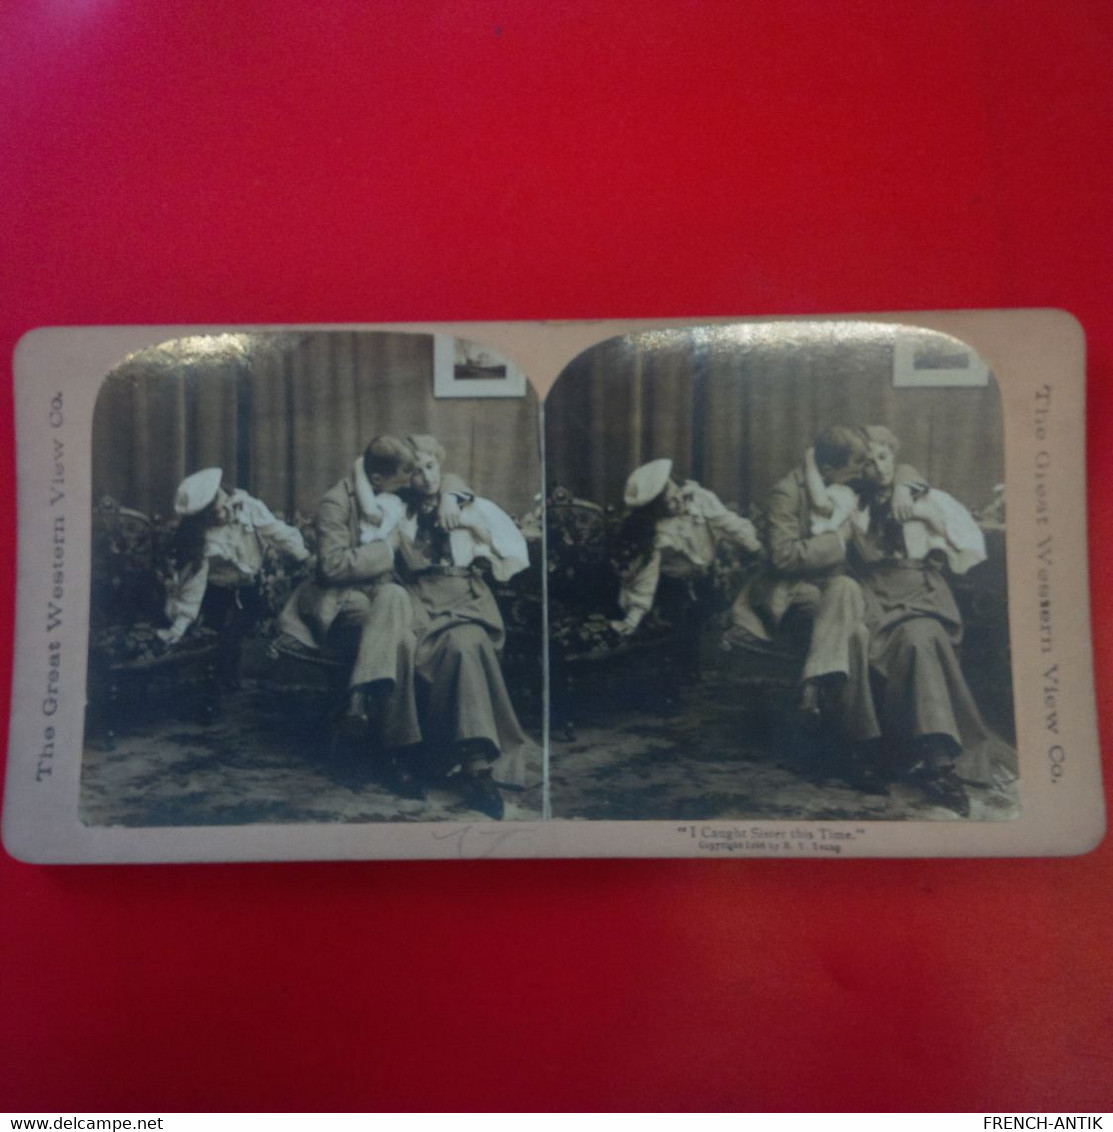 PHOTO STEREO I CAUGHT SISTER THIS TIME - Stereoscopic